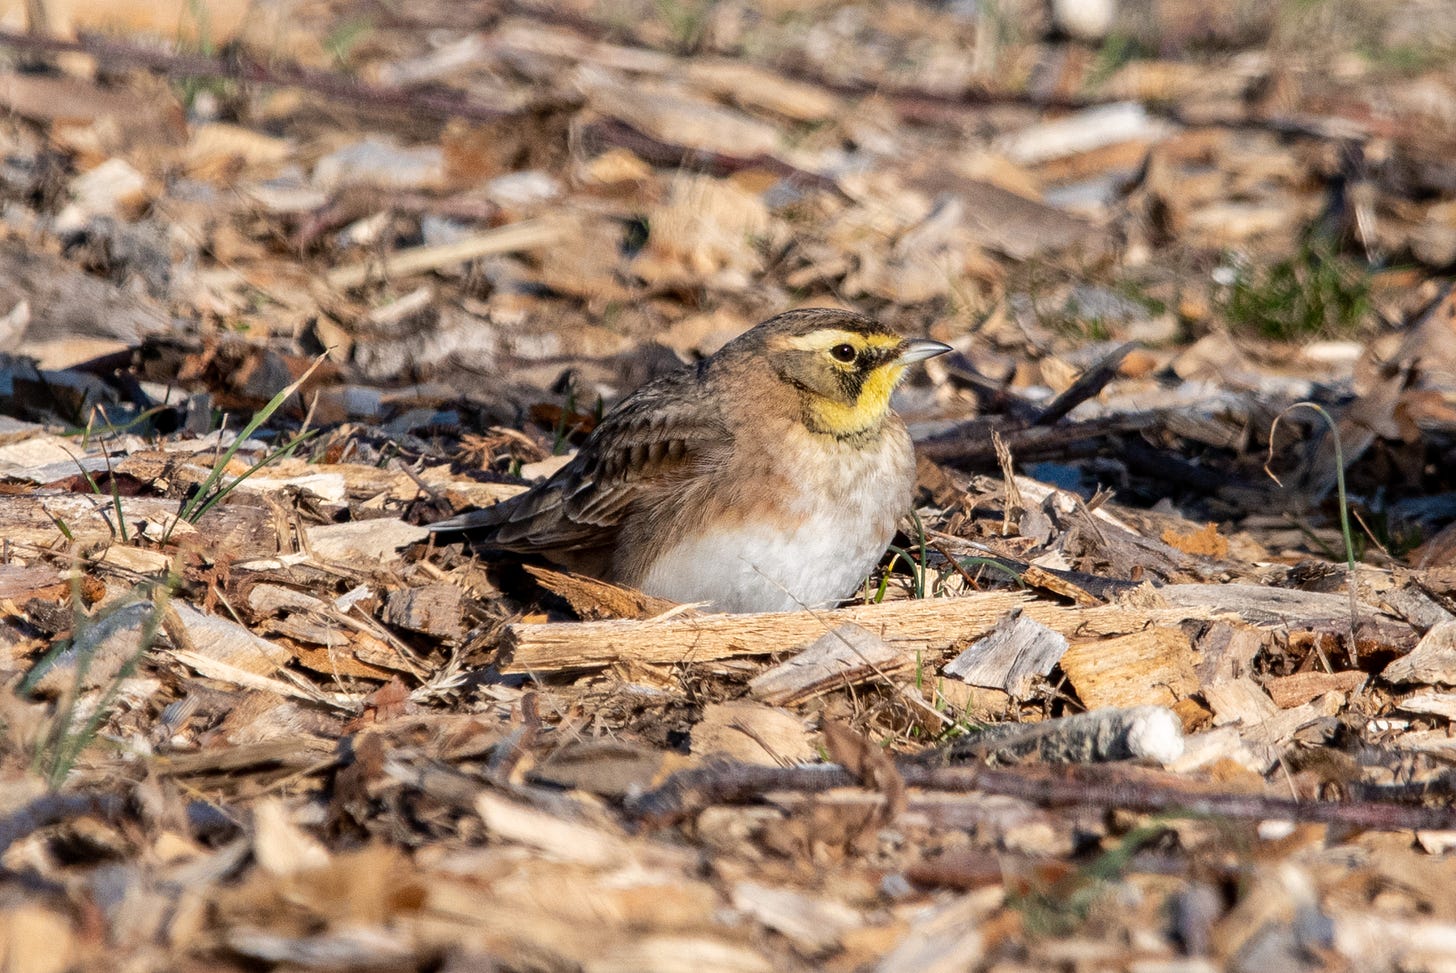 A horned lark seated among wood chips and other debris